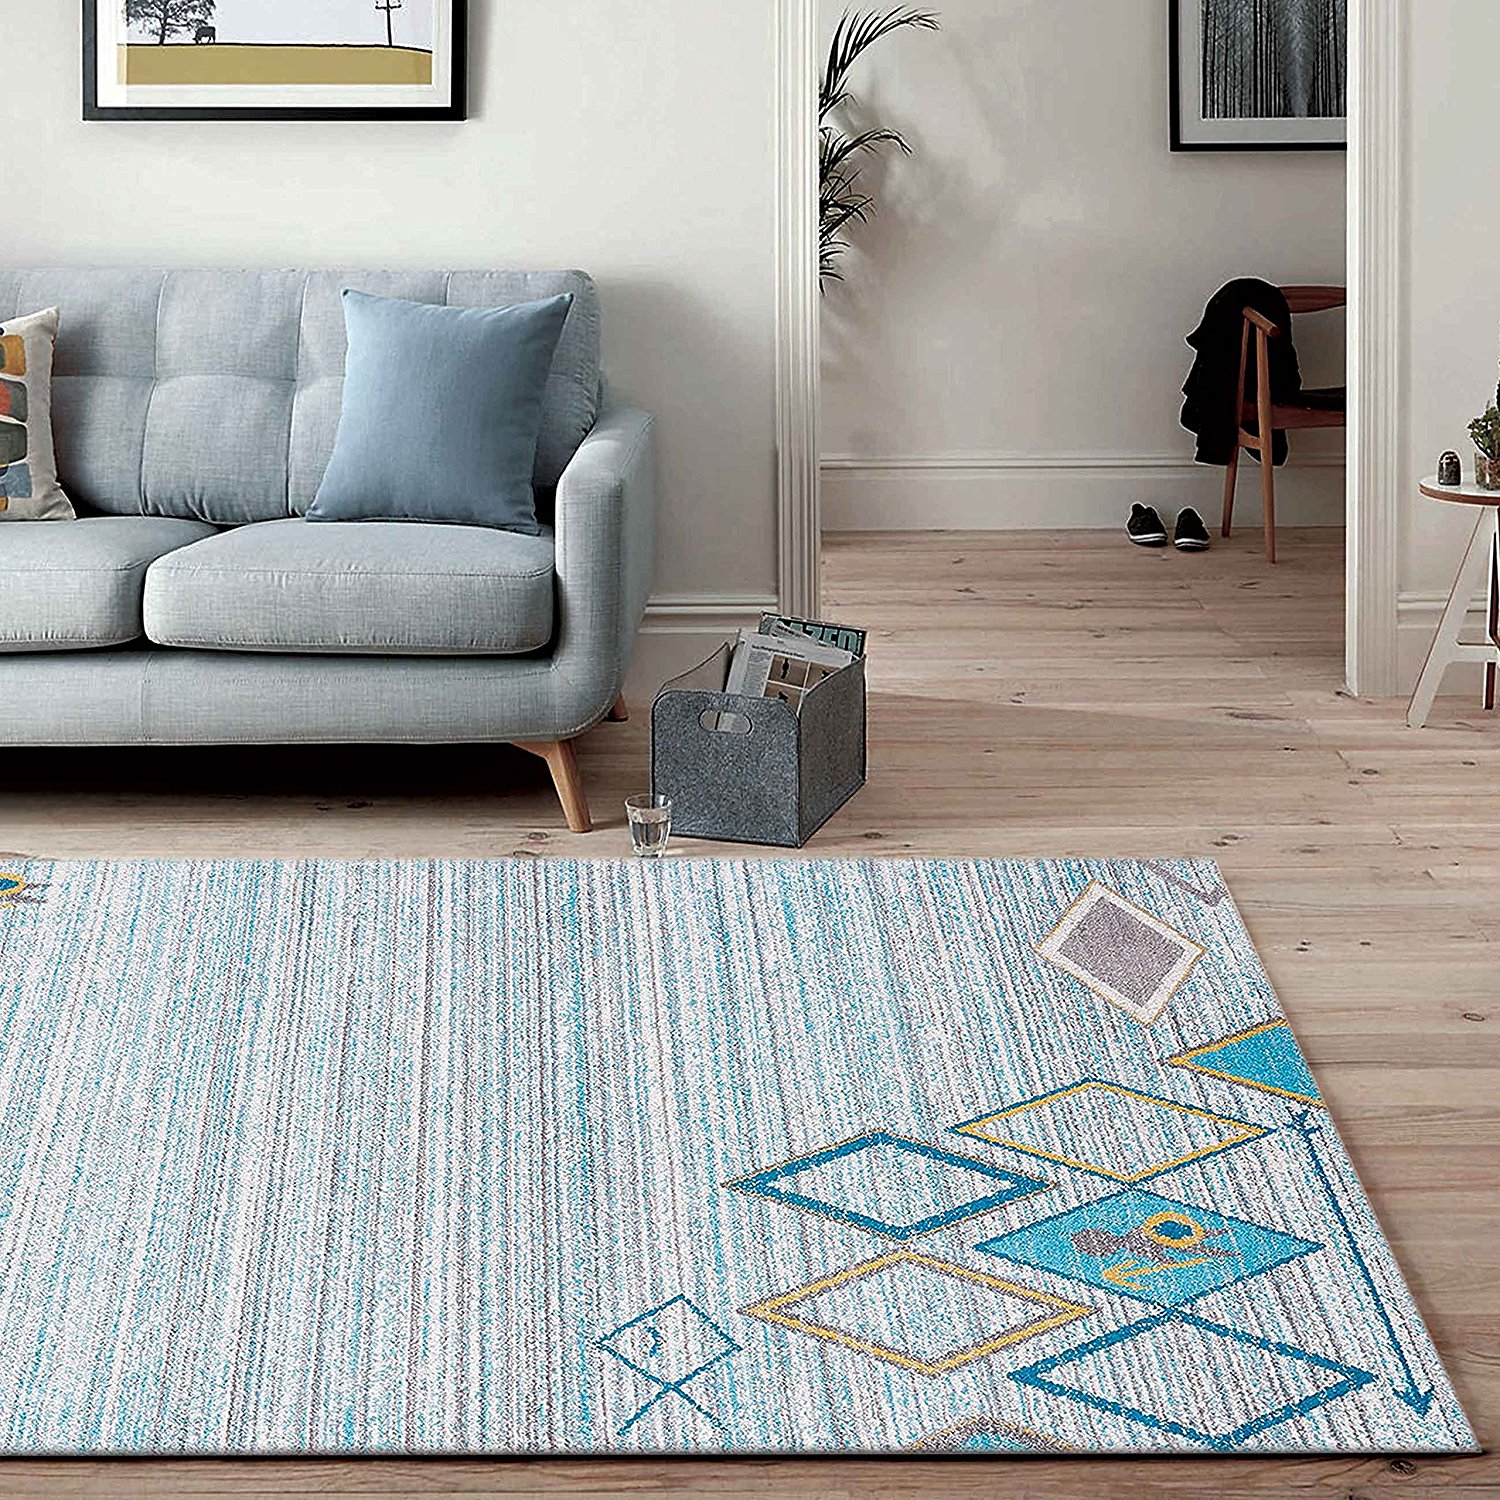 A bright patterned luxury area rug in a living room featuring hardwood floors, grey sofa and a doorway leading to the entryway